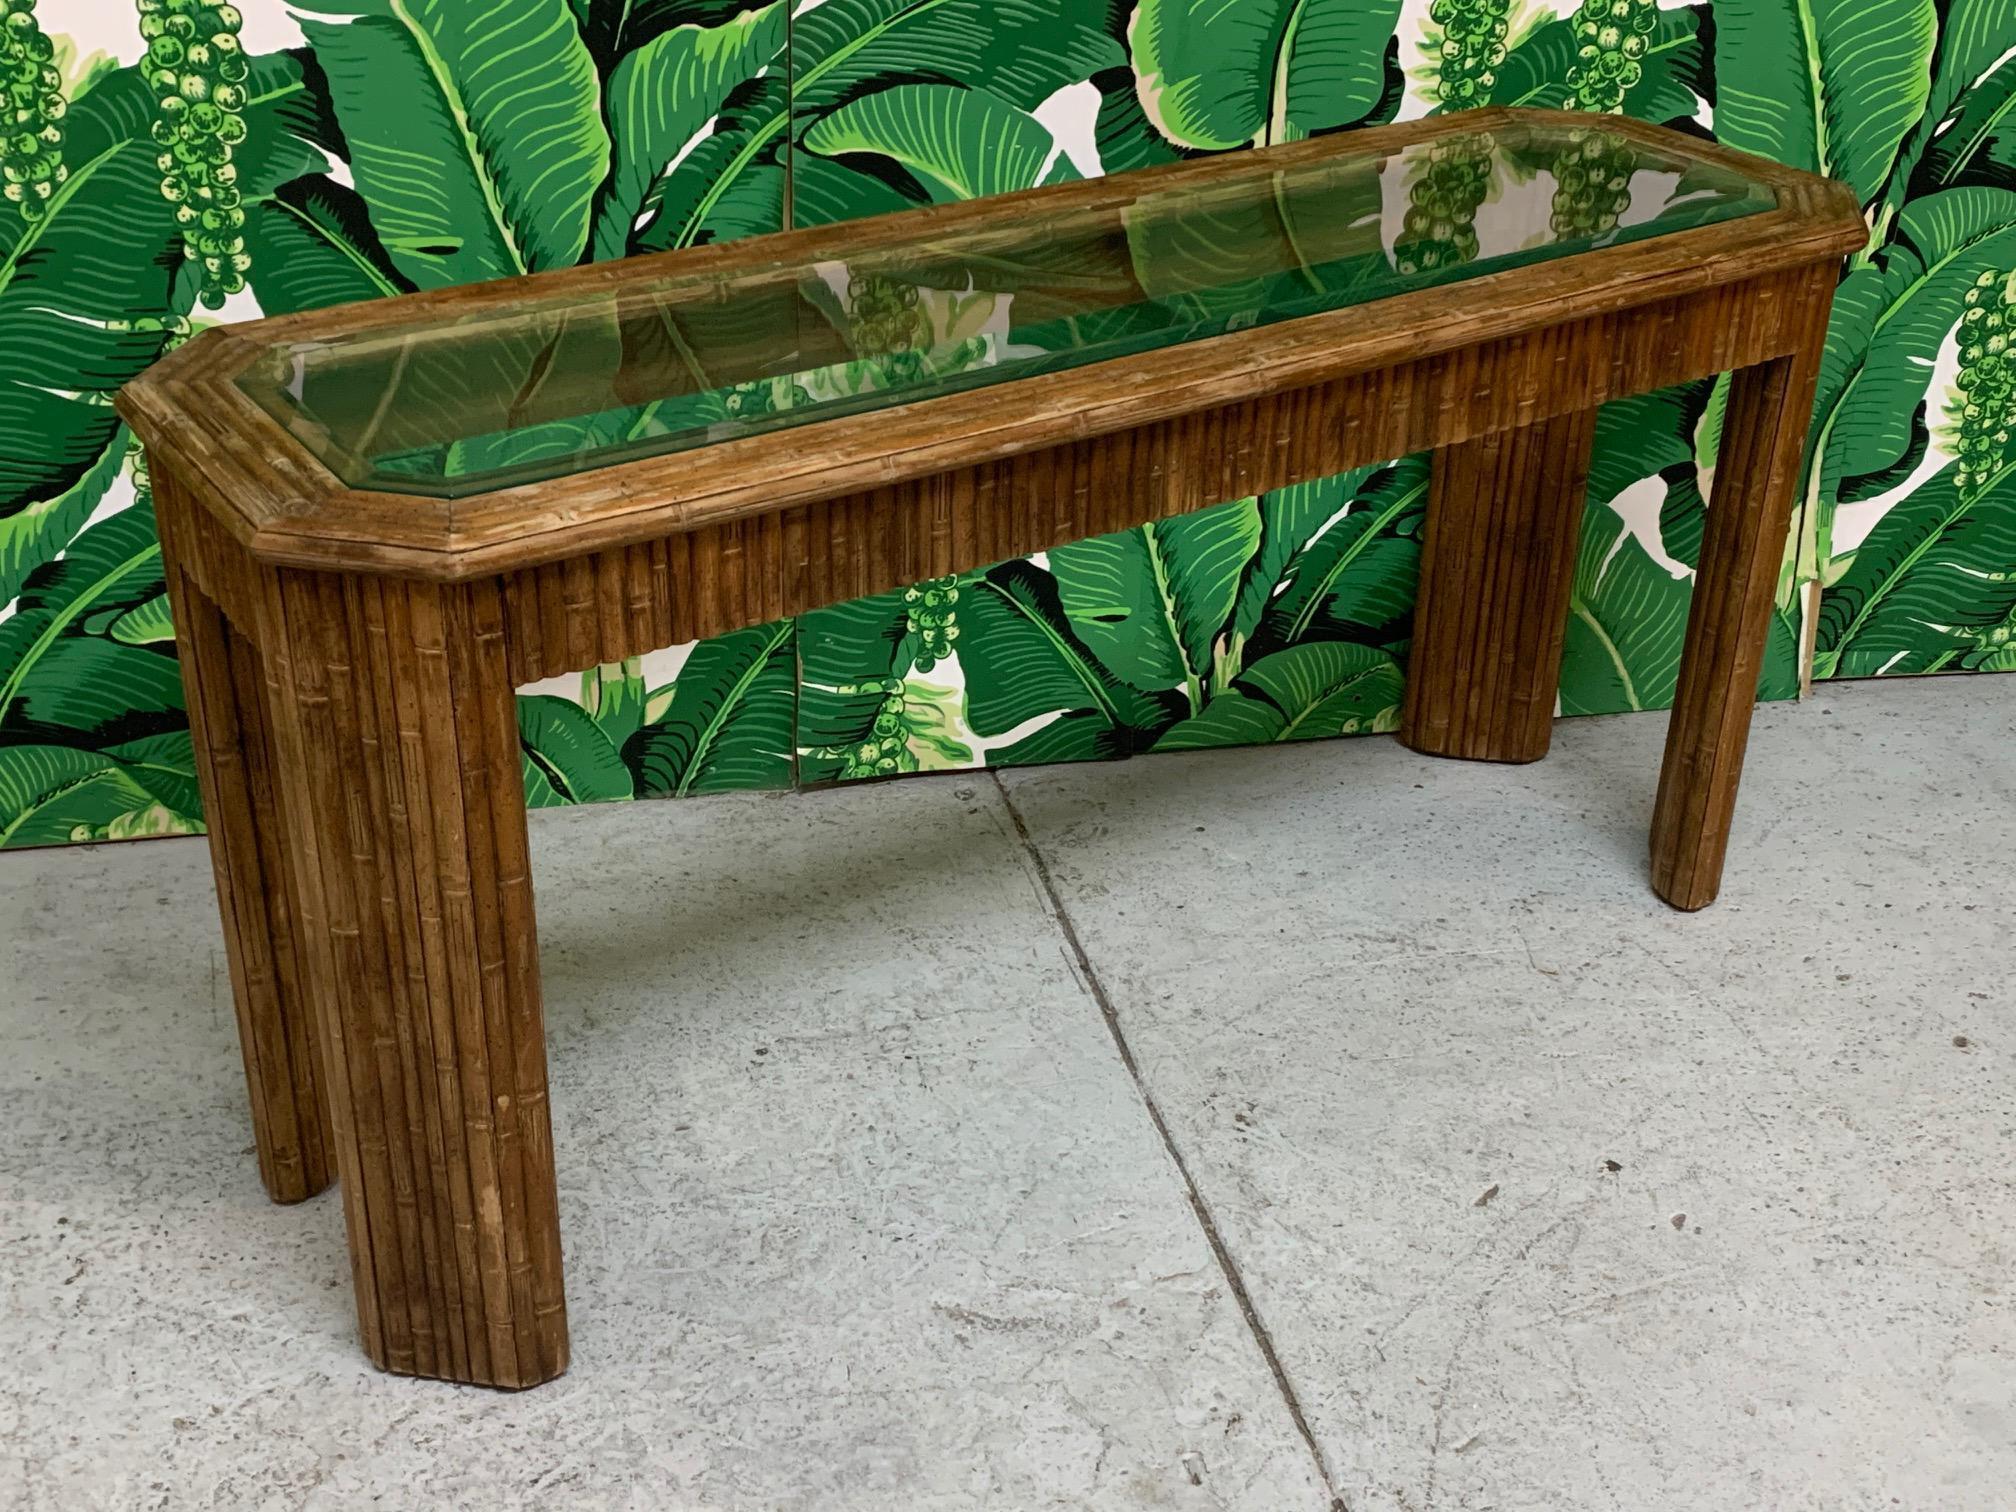 Vintage console table features faux bamboo veneer and glass insert top. Good vintage condition with minor imperfections consistent with age, see photos for condition details.
For a shipping quote to your exact zip code, please message us.
